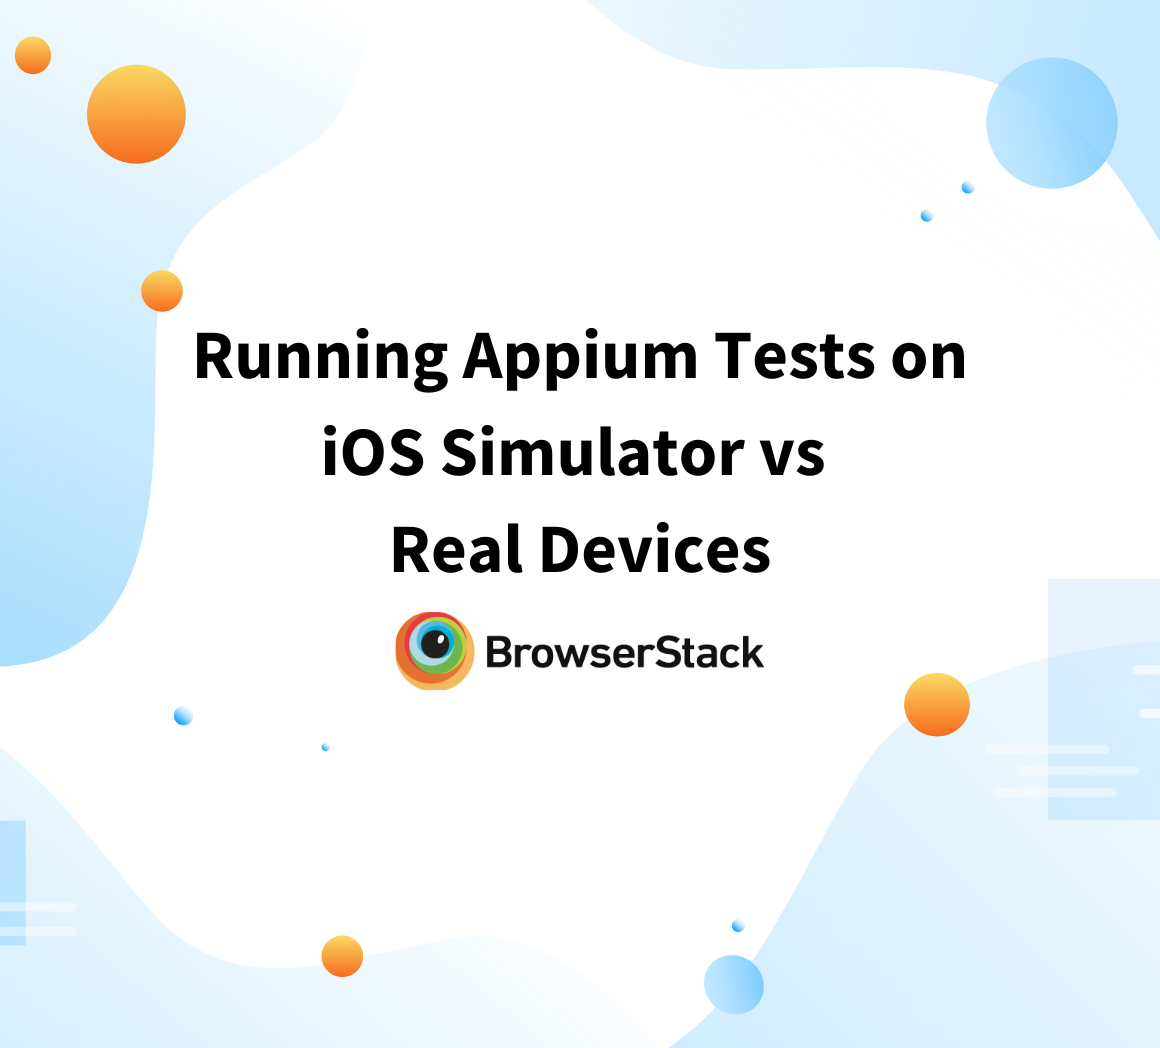 Running Appium Tests on iOS Simulator vs Real Devices